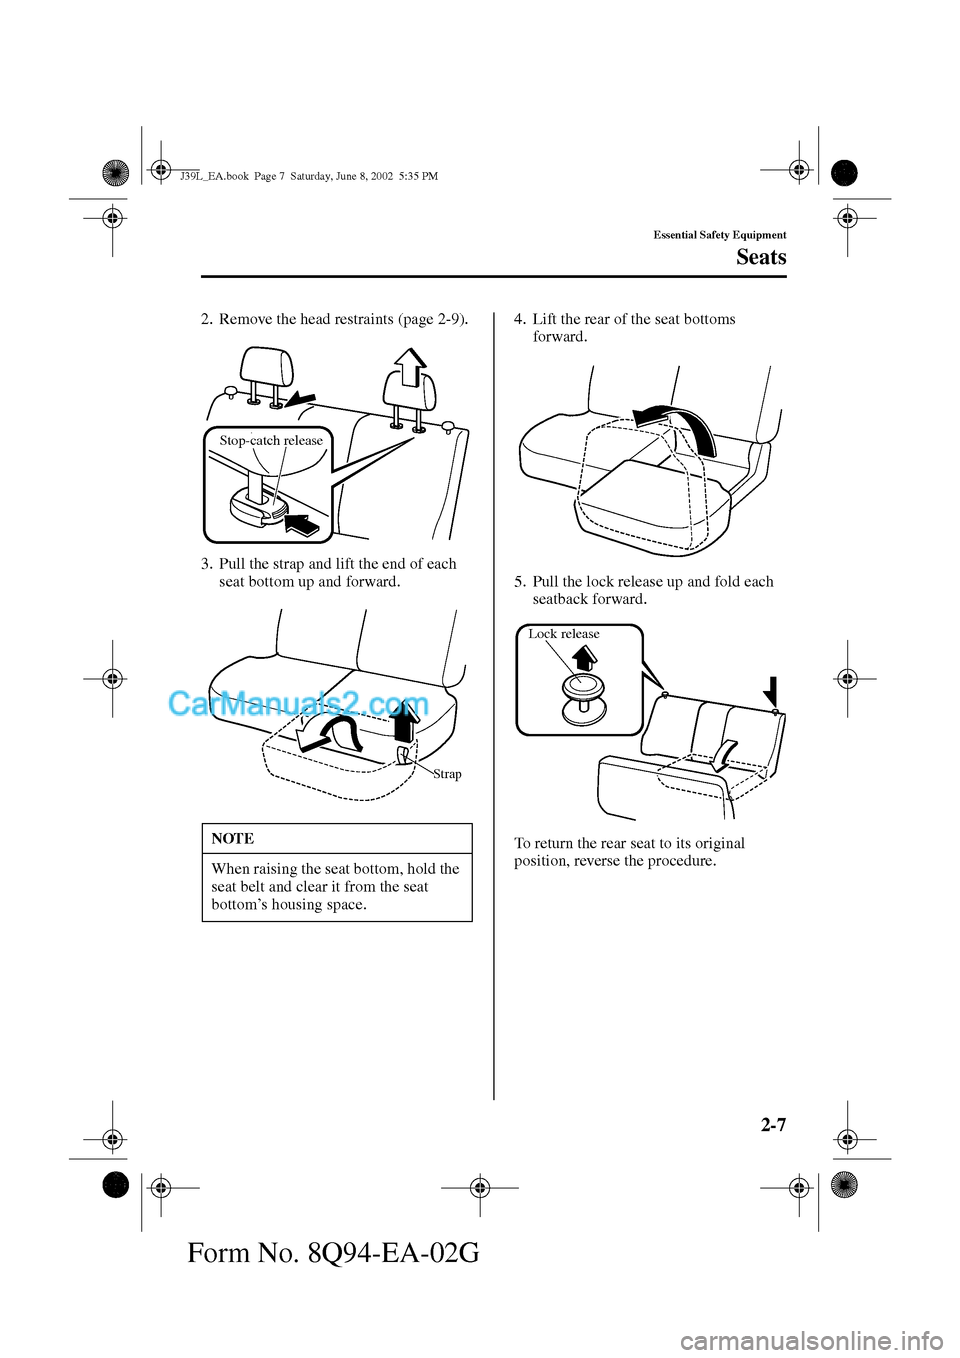 MAZDA MODEL PROTÉGÉ 2003   (in English) User Guide 2-7
Essential Safety Equipment
Seats
Form No. 8Q94-EA-02G
2. Remove the head restraints (page 2-9).
3. Pull the strap and lift the end of each 
seat bottom up and forward.4. Lift the rear of the seat 